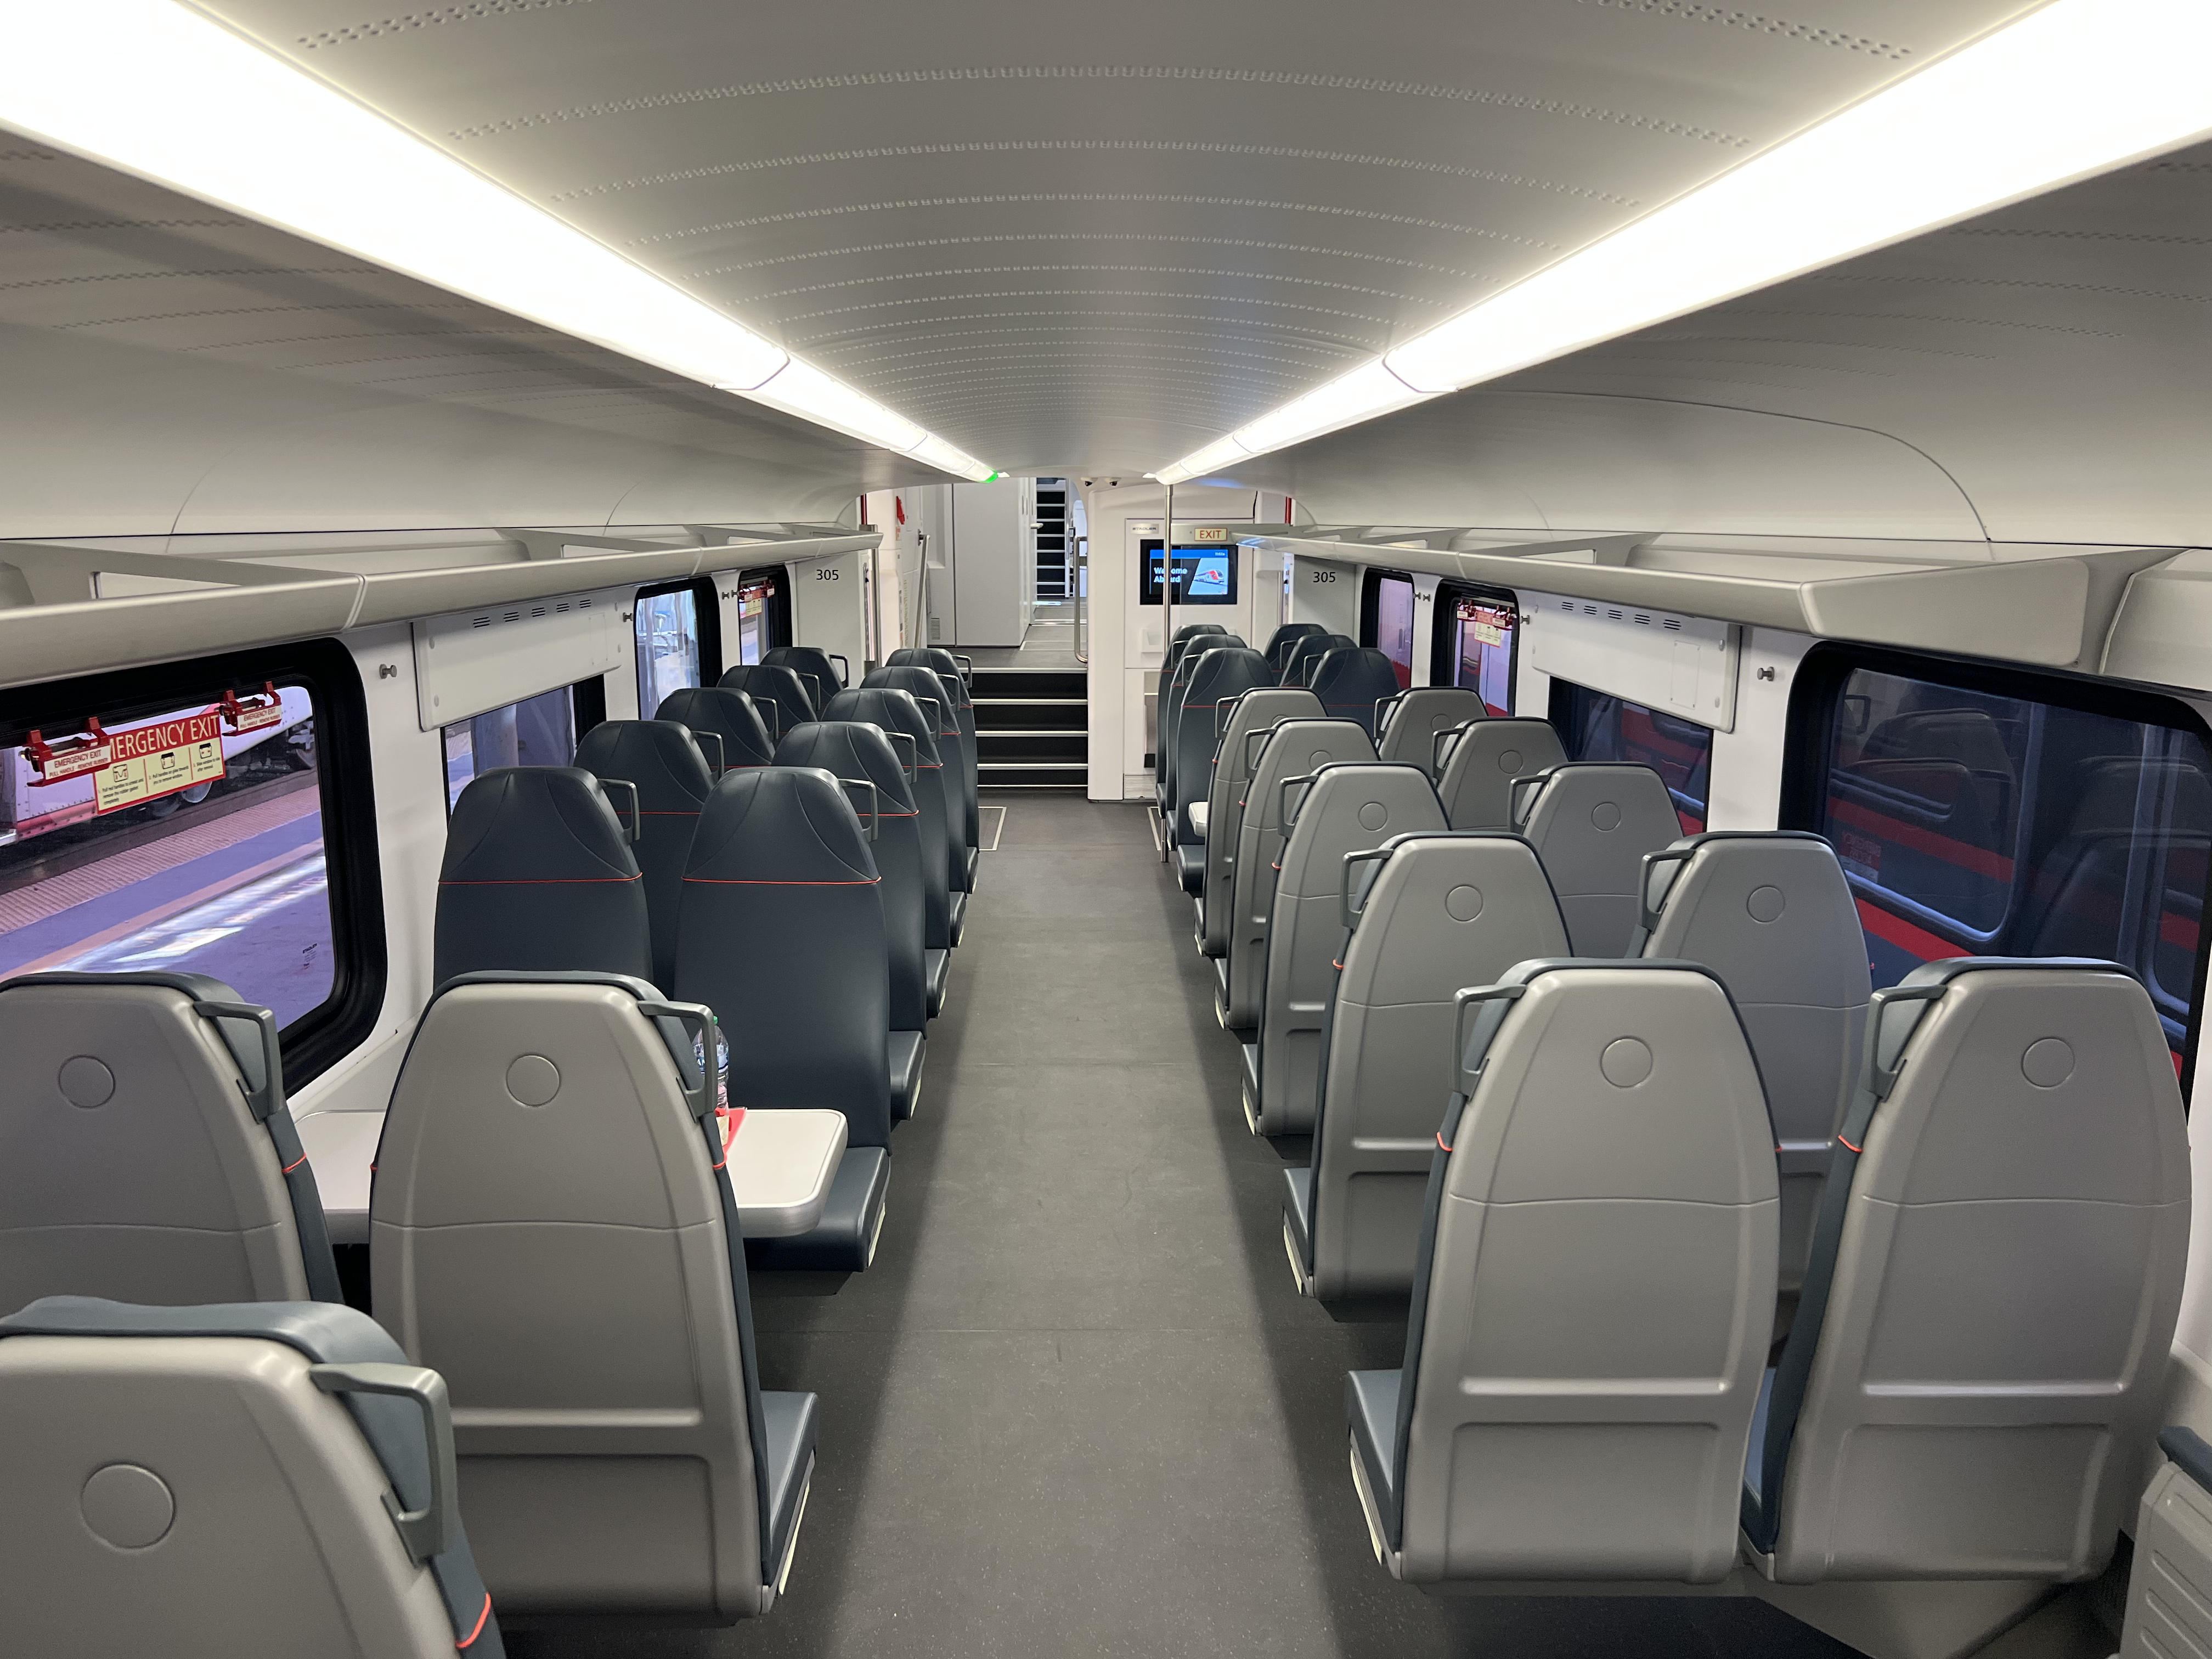 Interior of KISS electric train by Stadler for Caltrain